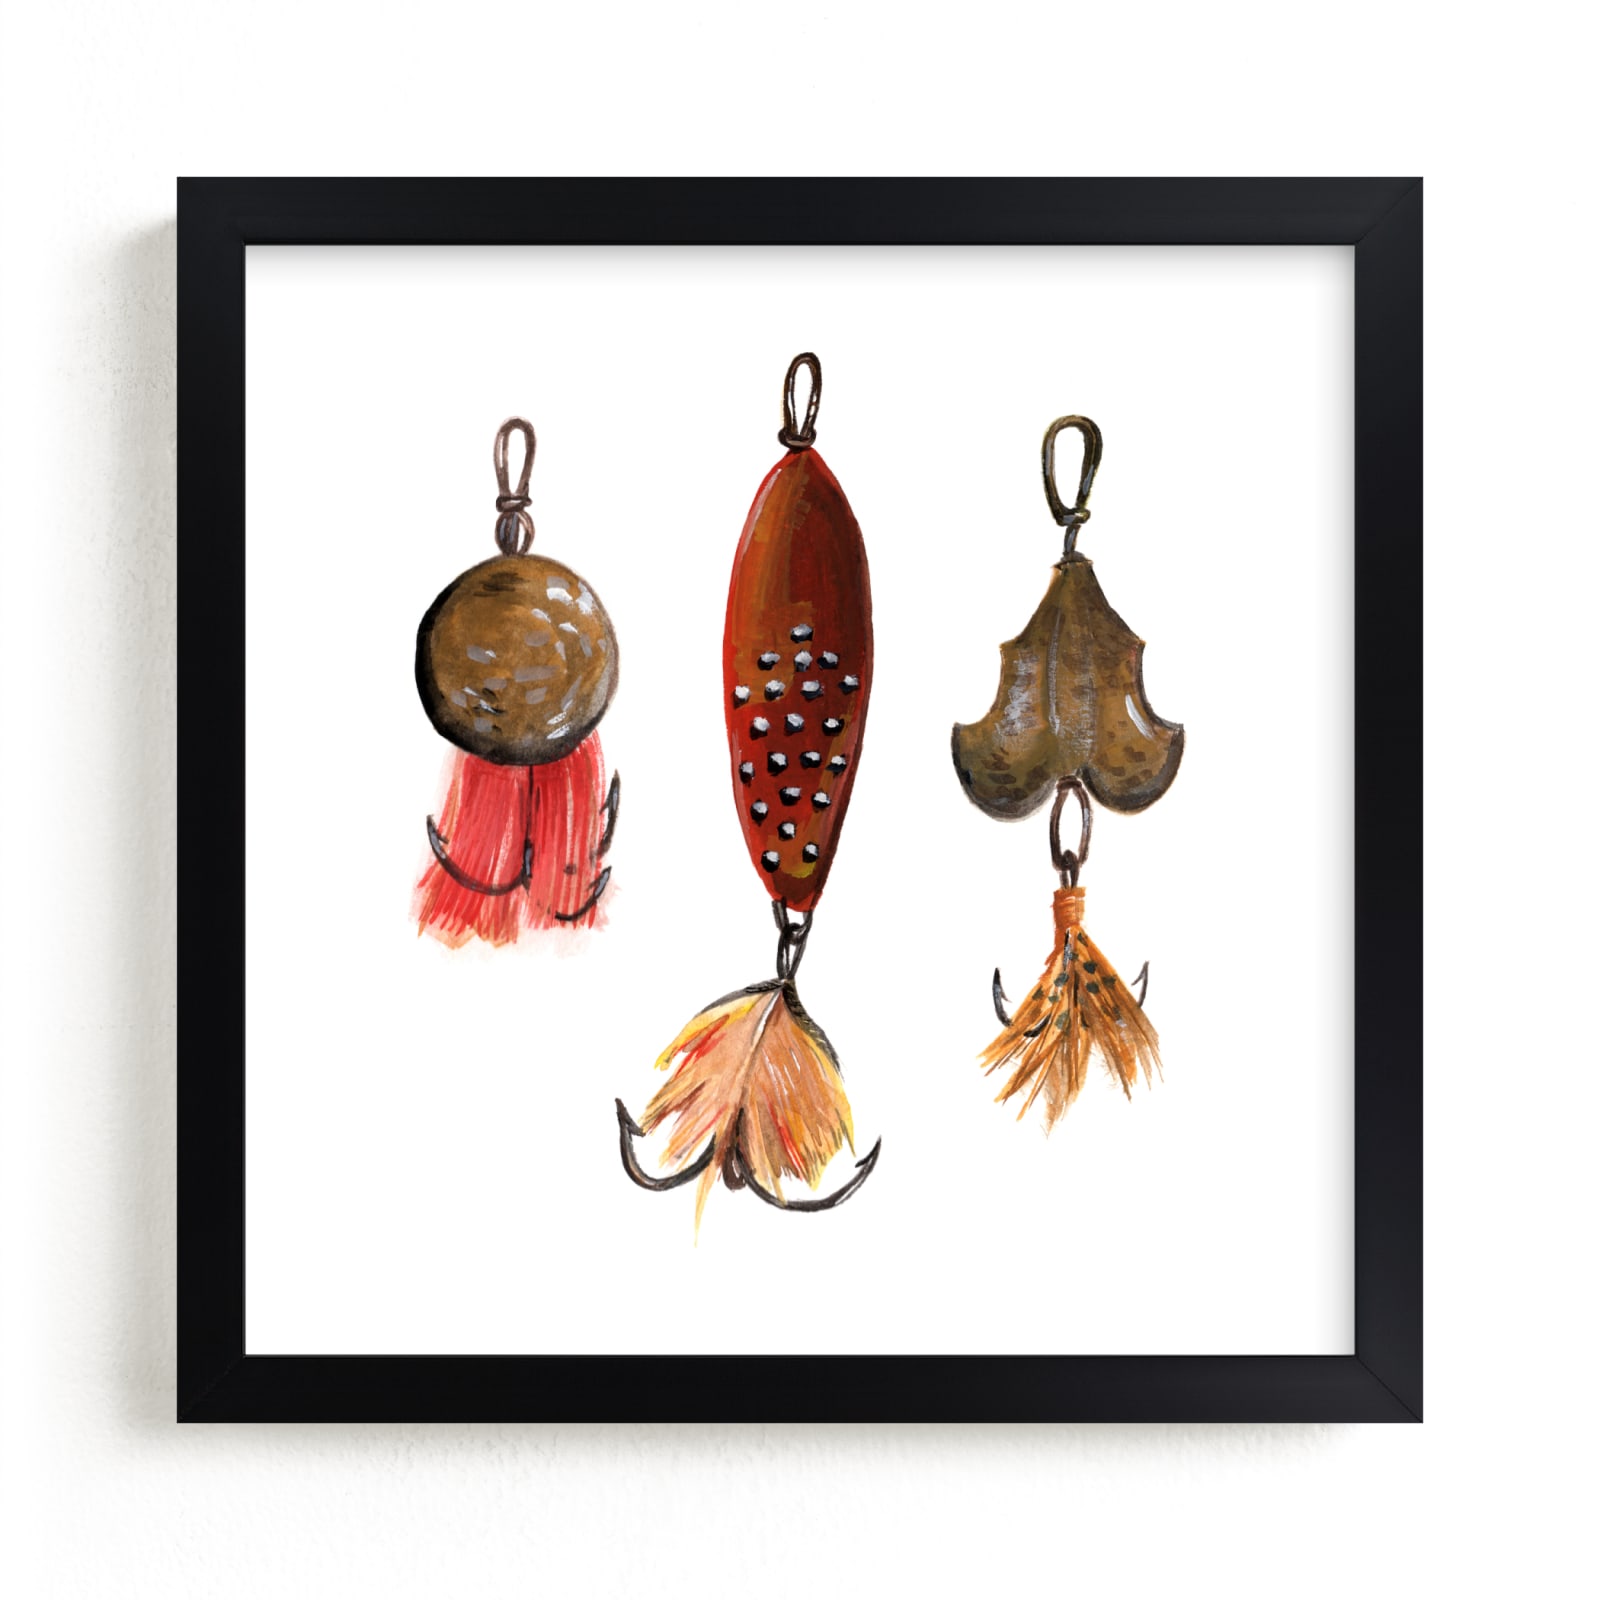 Fishing Lures No. 1 Children's Art Prints by Tanya Lee of Frooted